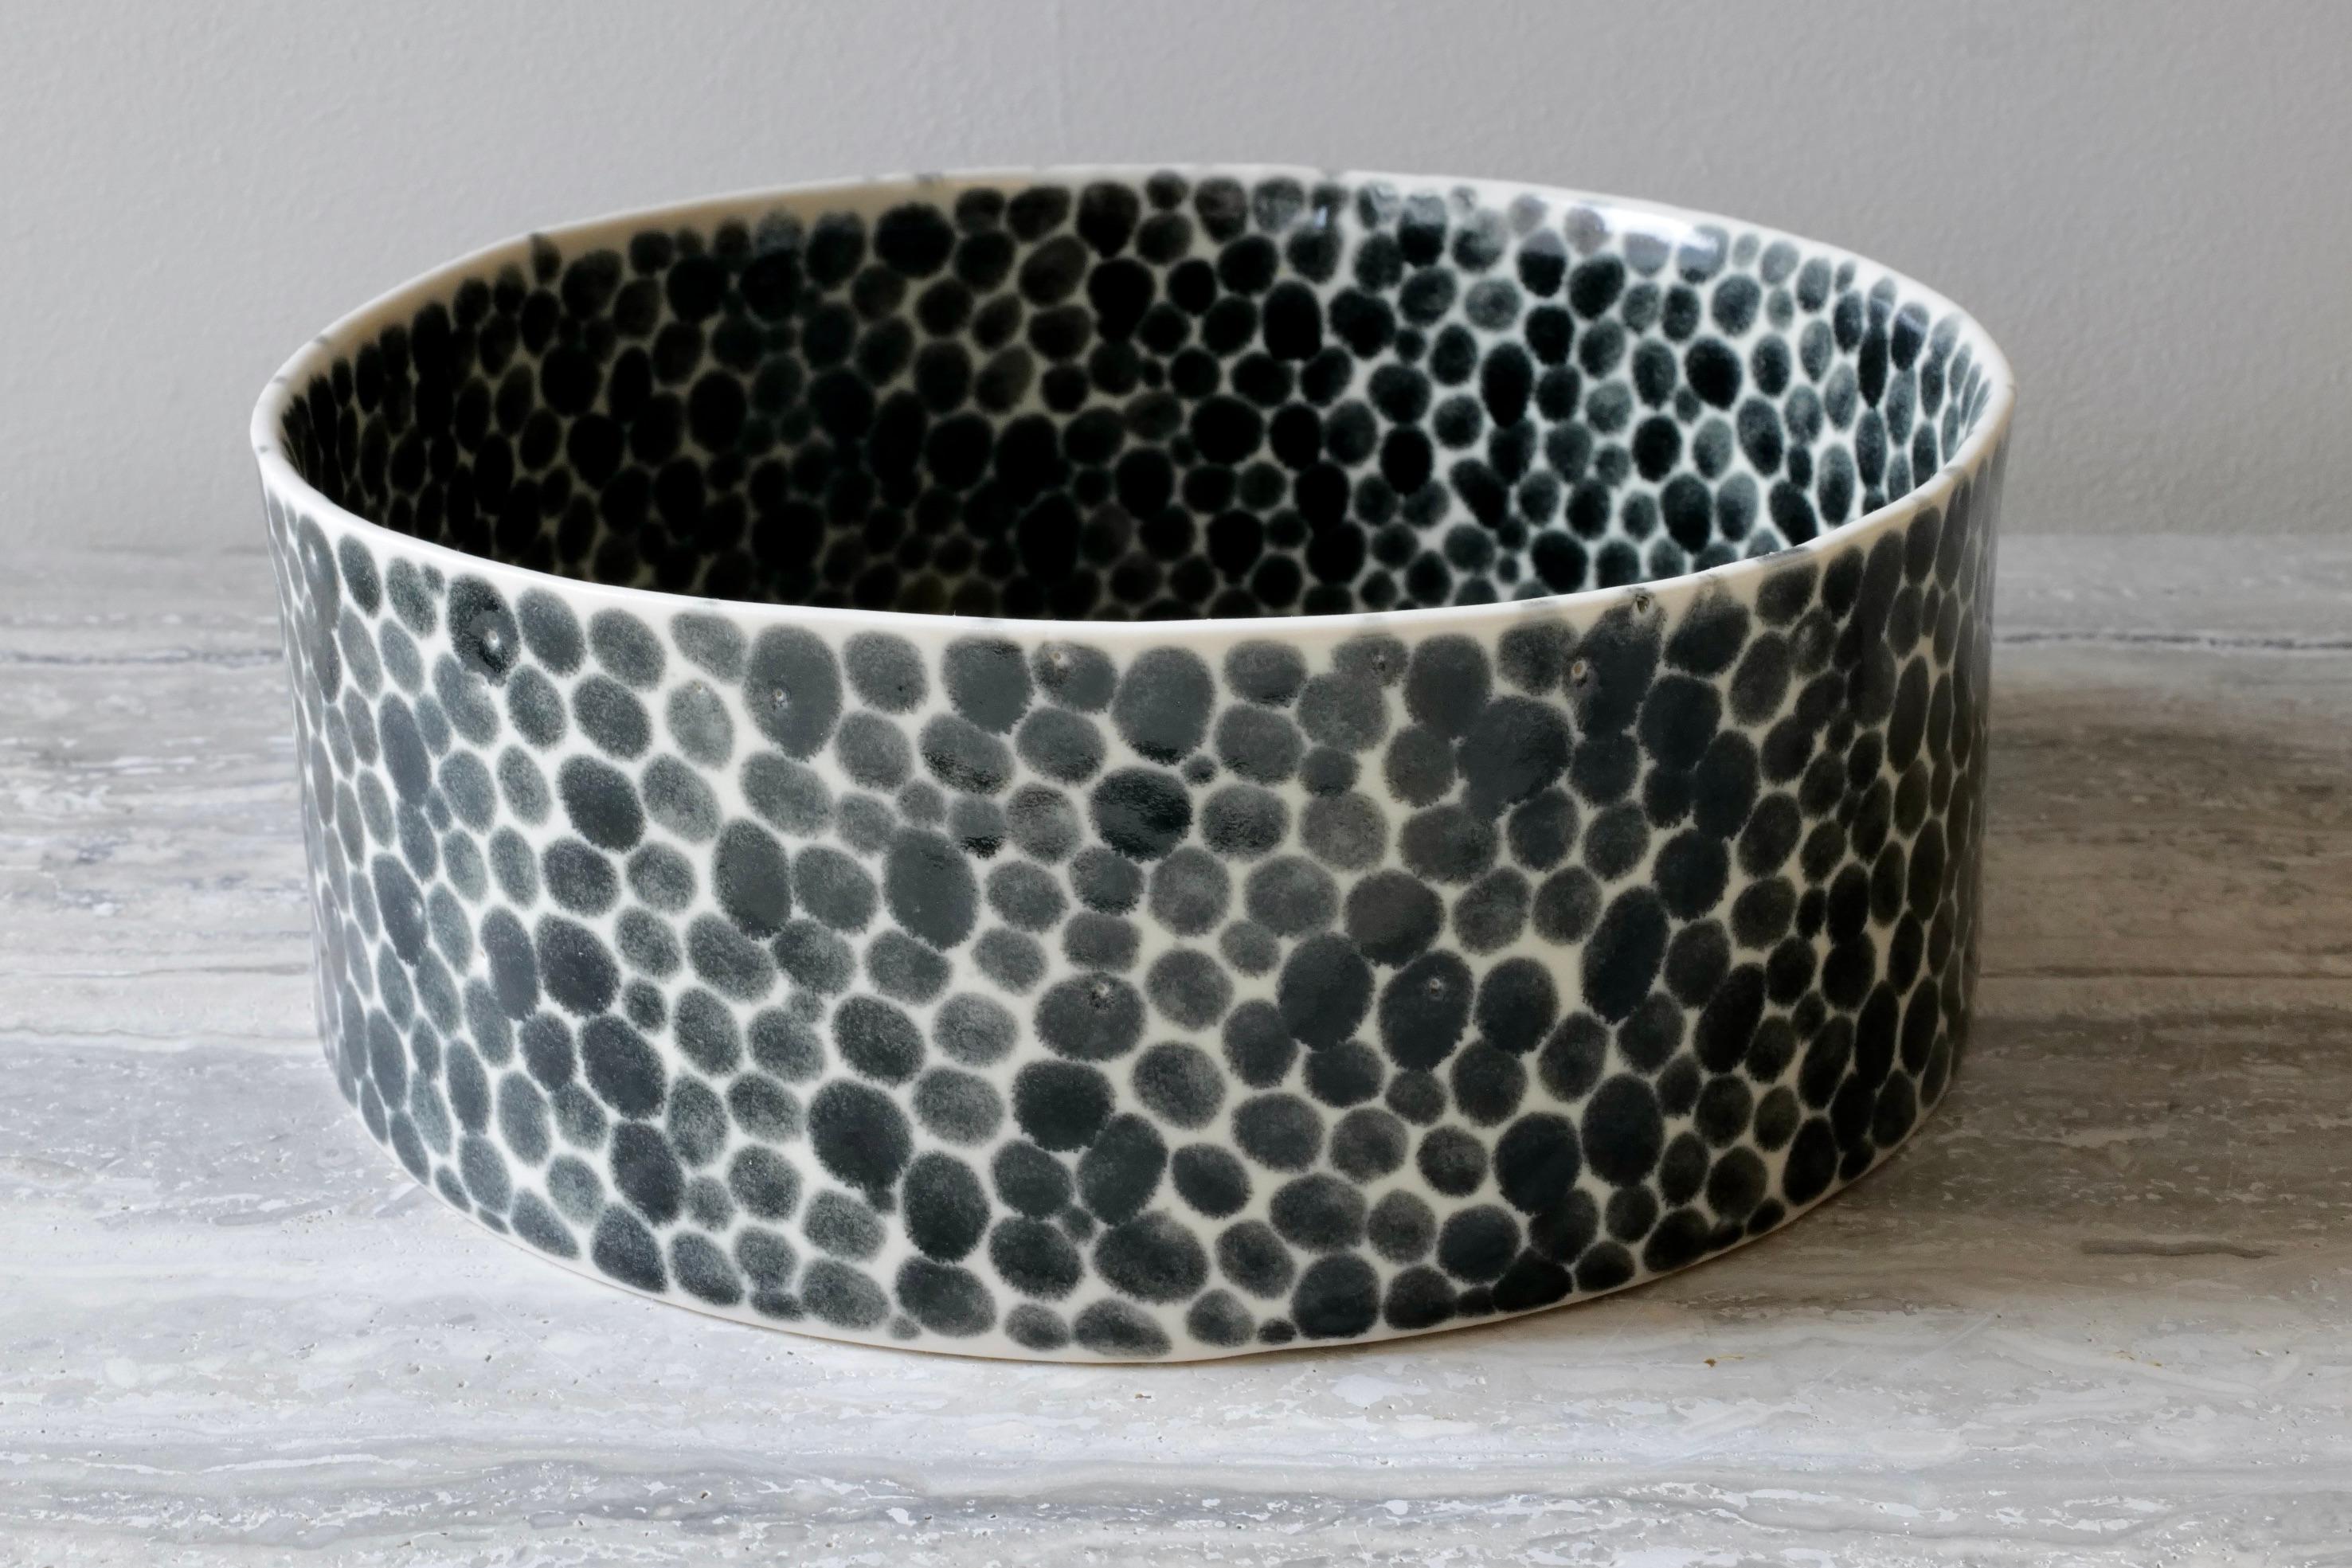 This multi-functional bowl is perfect for fruits or vegetables or for serving food. Hand-cast in porcelain and once bisque fired, each dot is hand-painted using a shiny black glaze. An unconventional layered glazing technique, developed by the